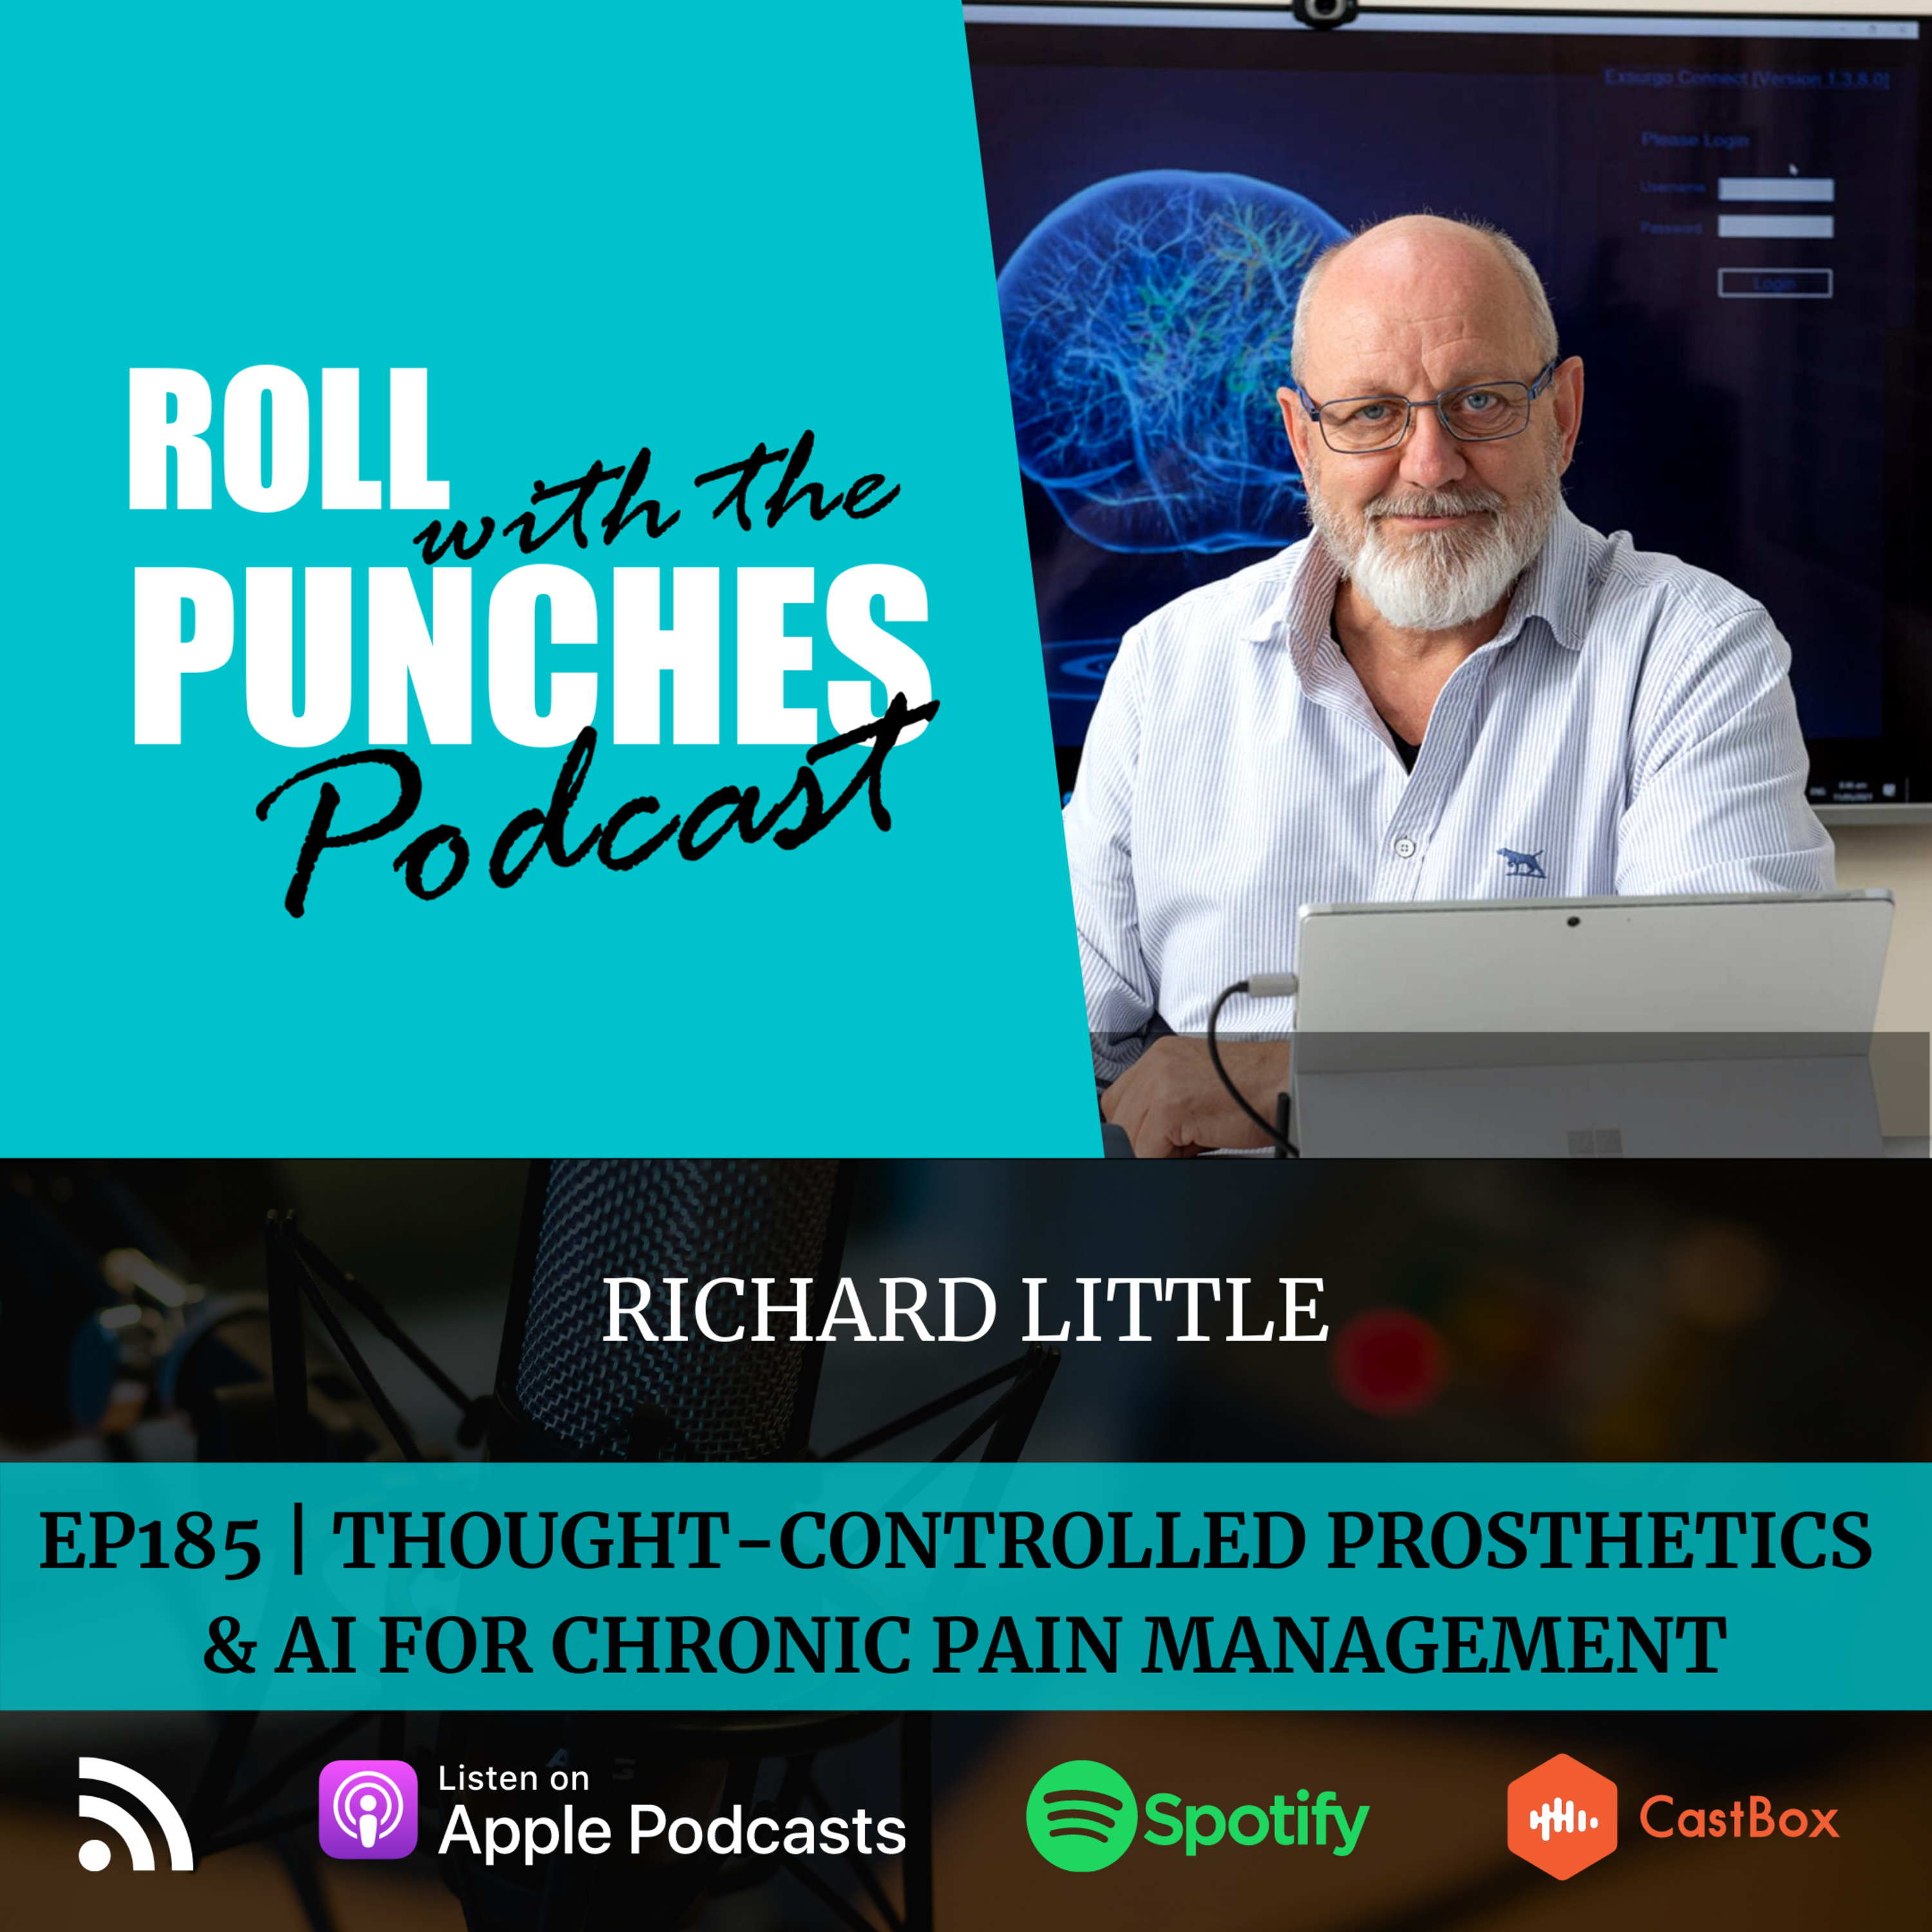 EP185 Thought-Controlled Prosthetics & AI For Chronic Pain Management | Richard Little